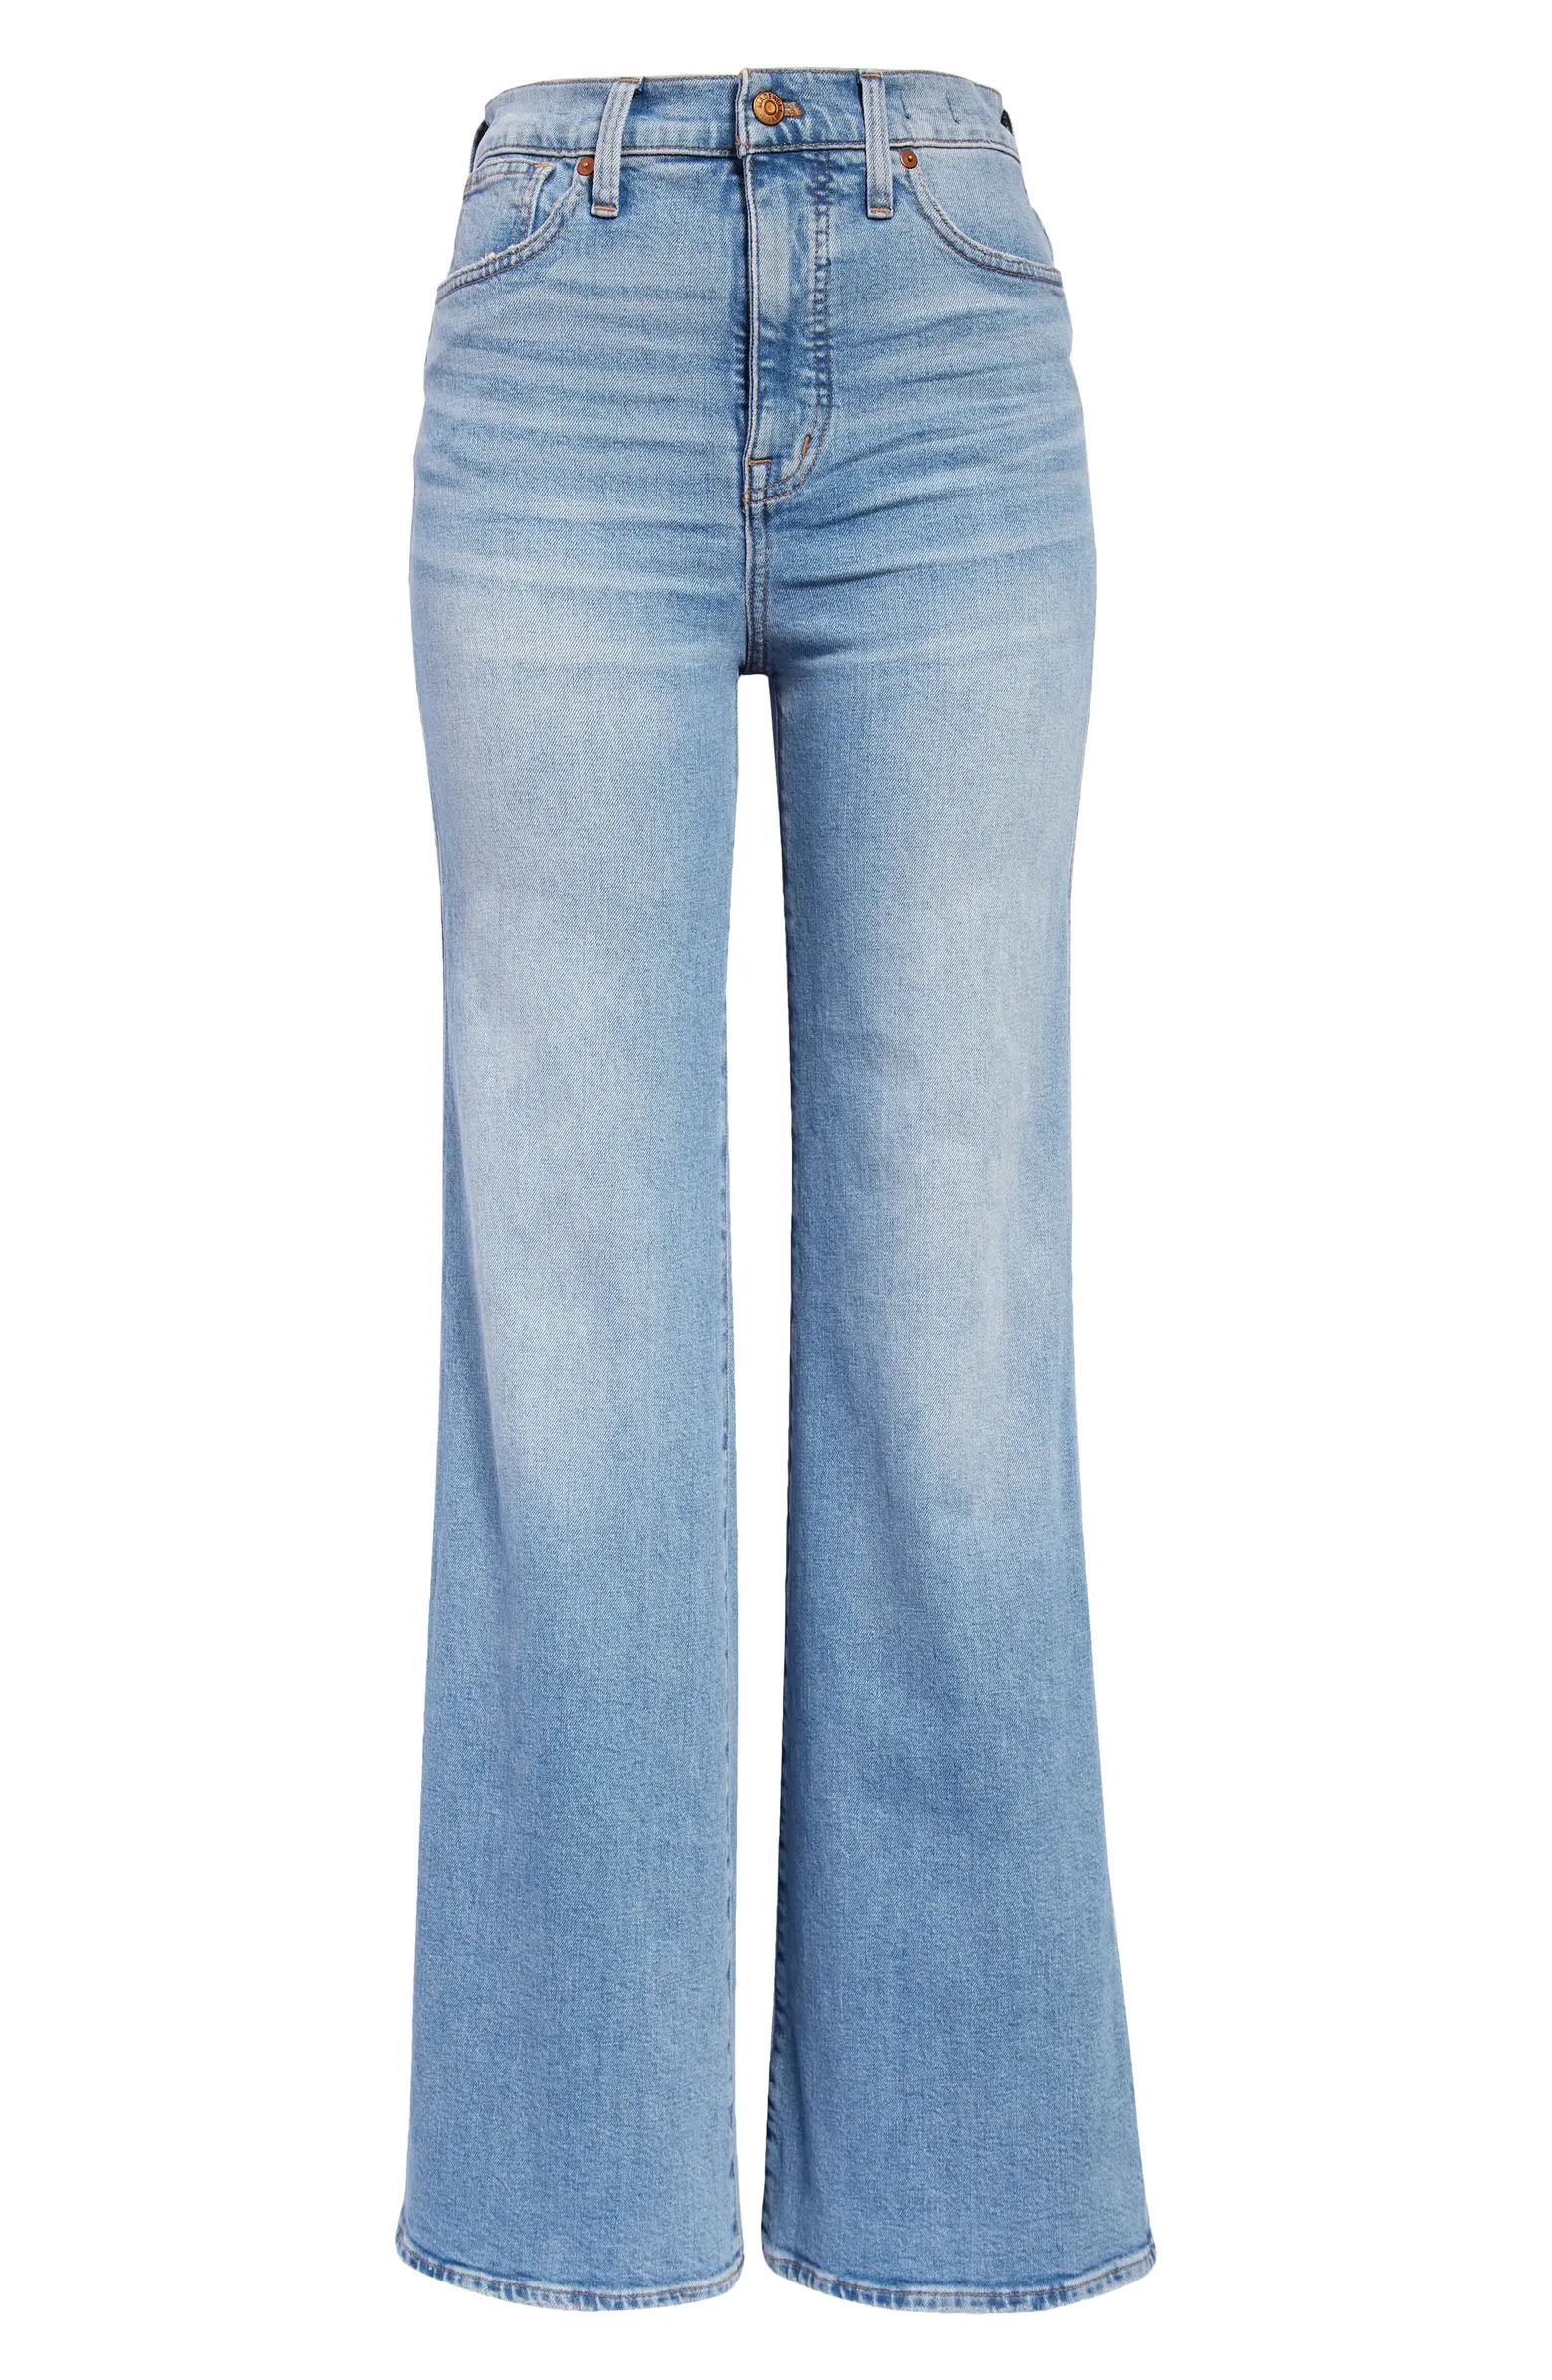 Madewell 11-Inch High Waist Flare Jeans | Nordstrom | Nordstrom